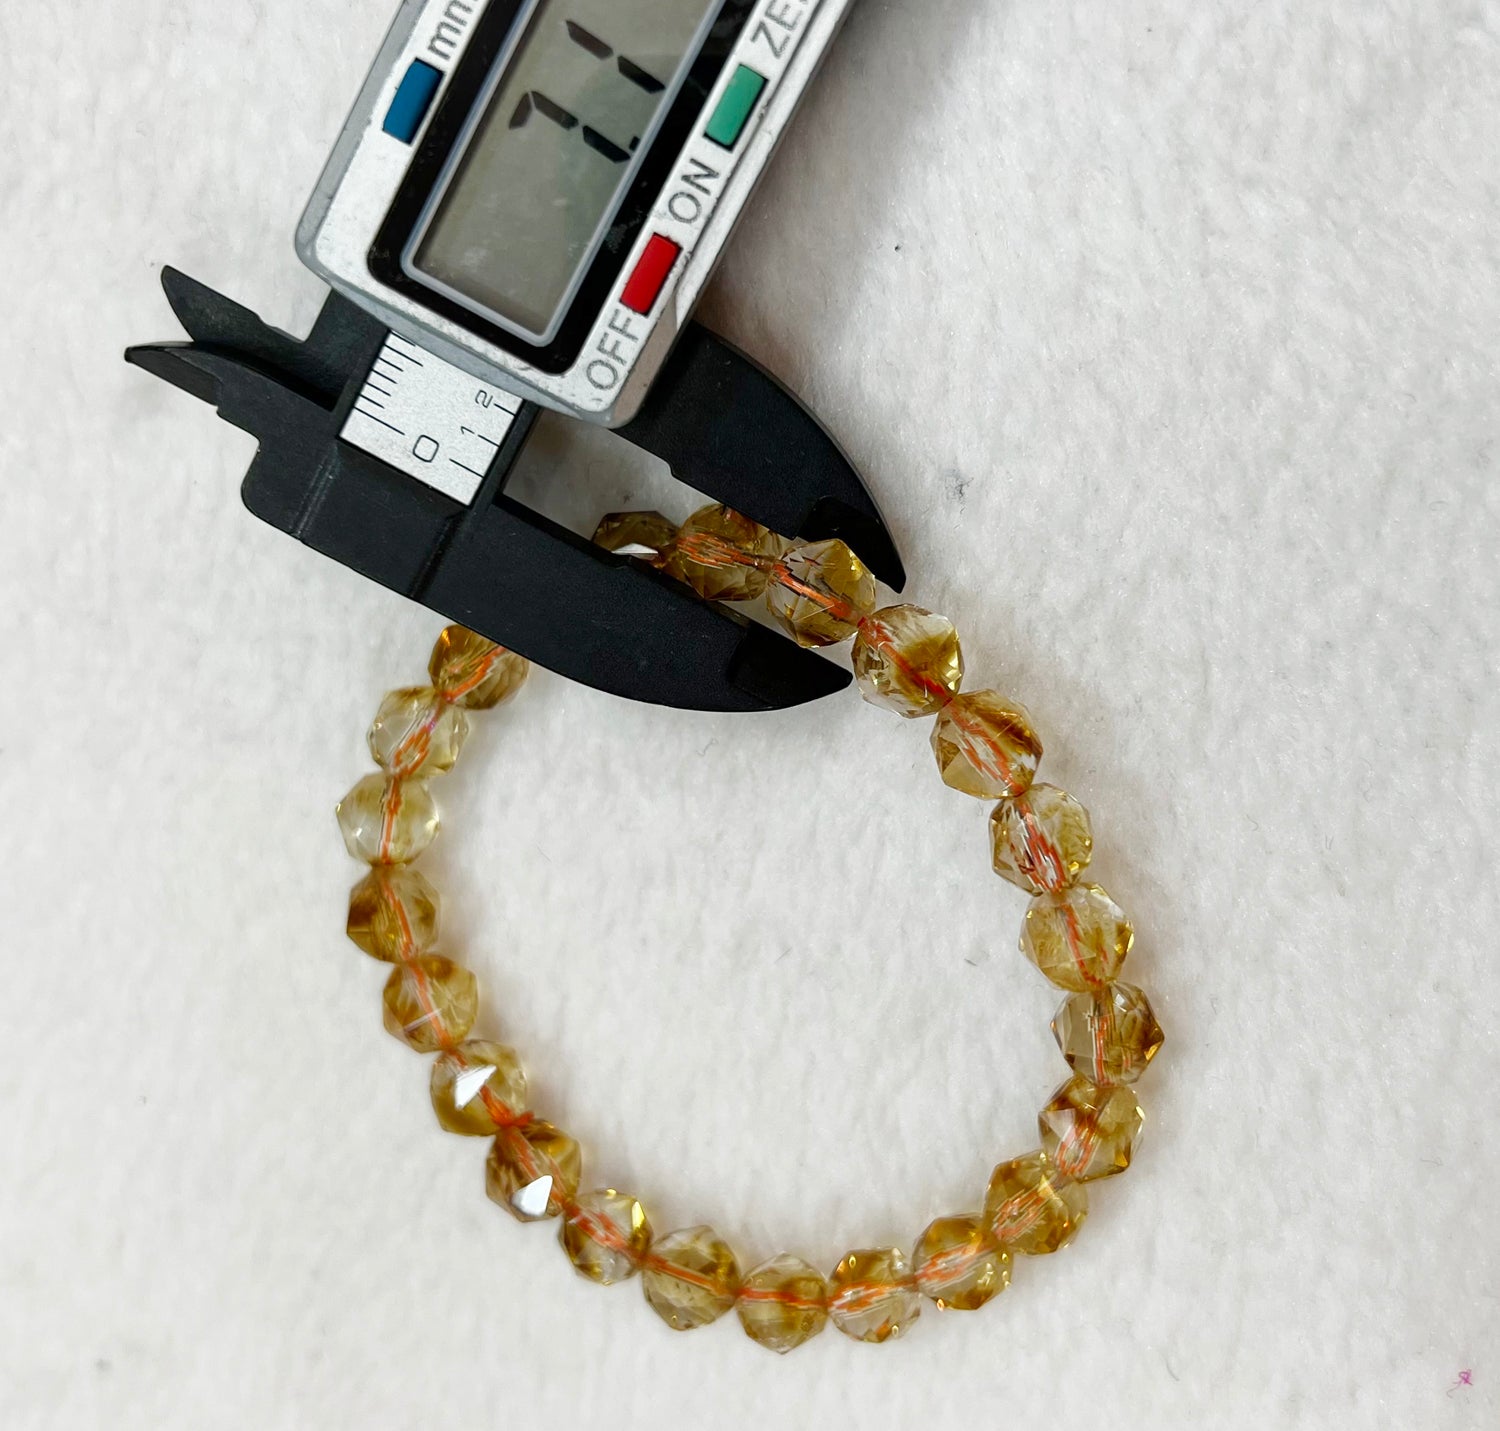 Bracelet of natural stone beads of yellow citrine attracting stones